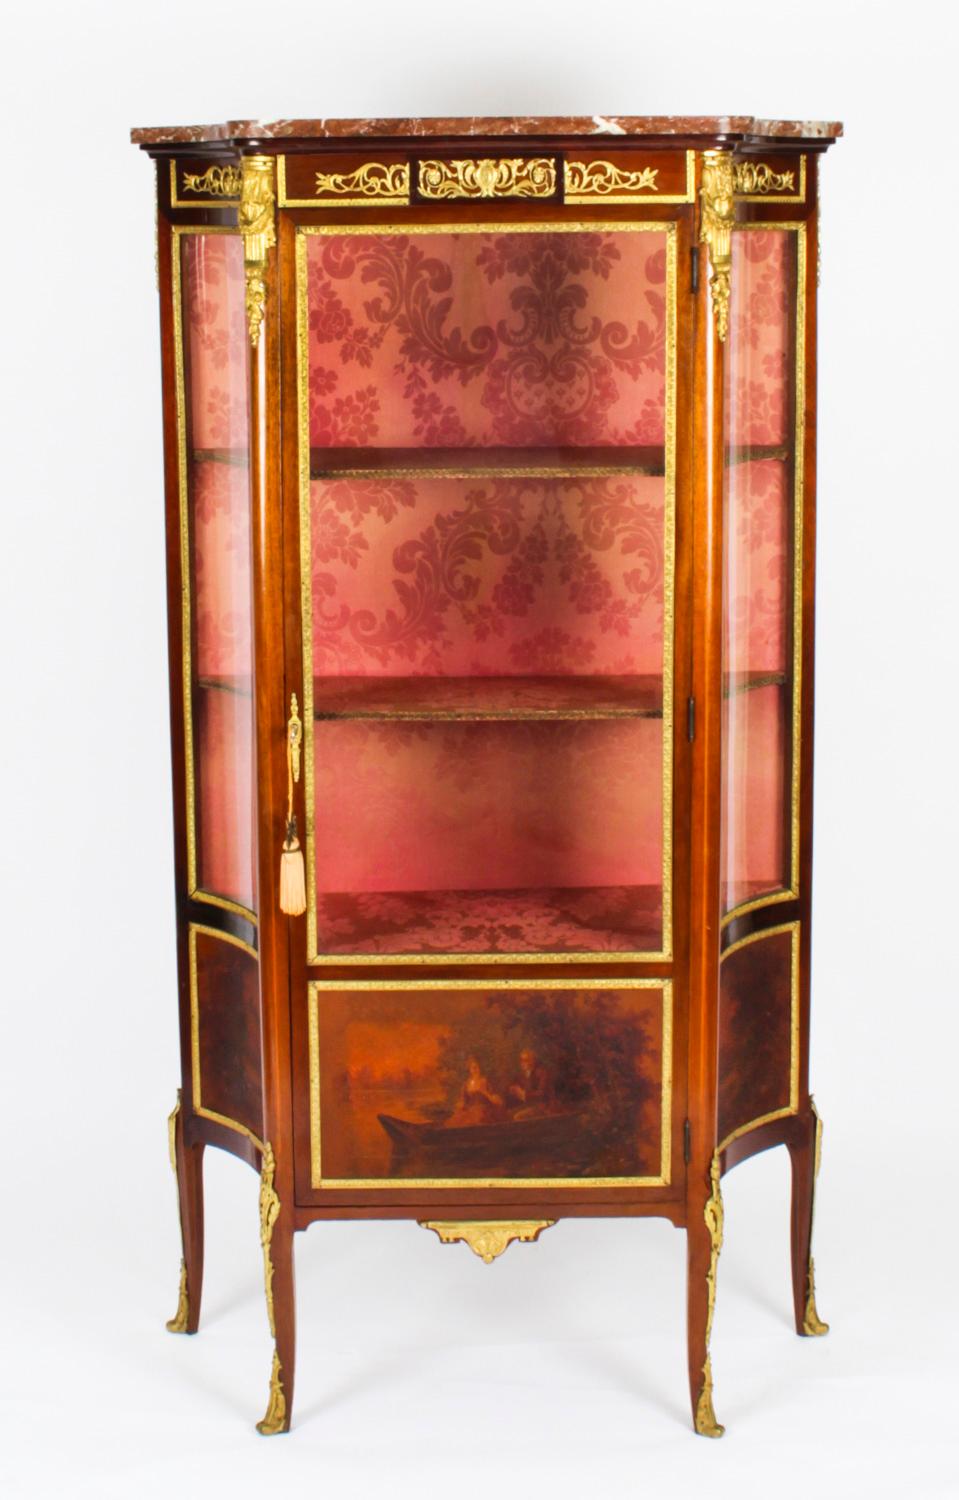 This is a fabulous antique French Louis Revival Vernis Martin ormolu mounted display cabinet, circa 1880 in date.
 
This beautiful cabinet has hand painted decoration, exquisite ormolu mounts and a beautiful marble top. The central panel has a